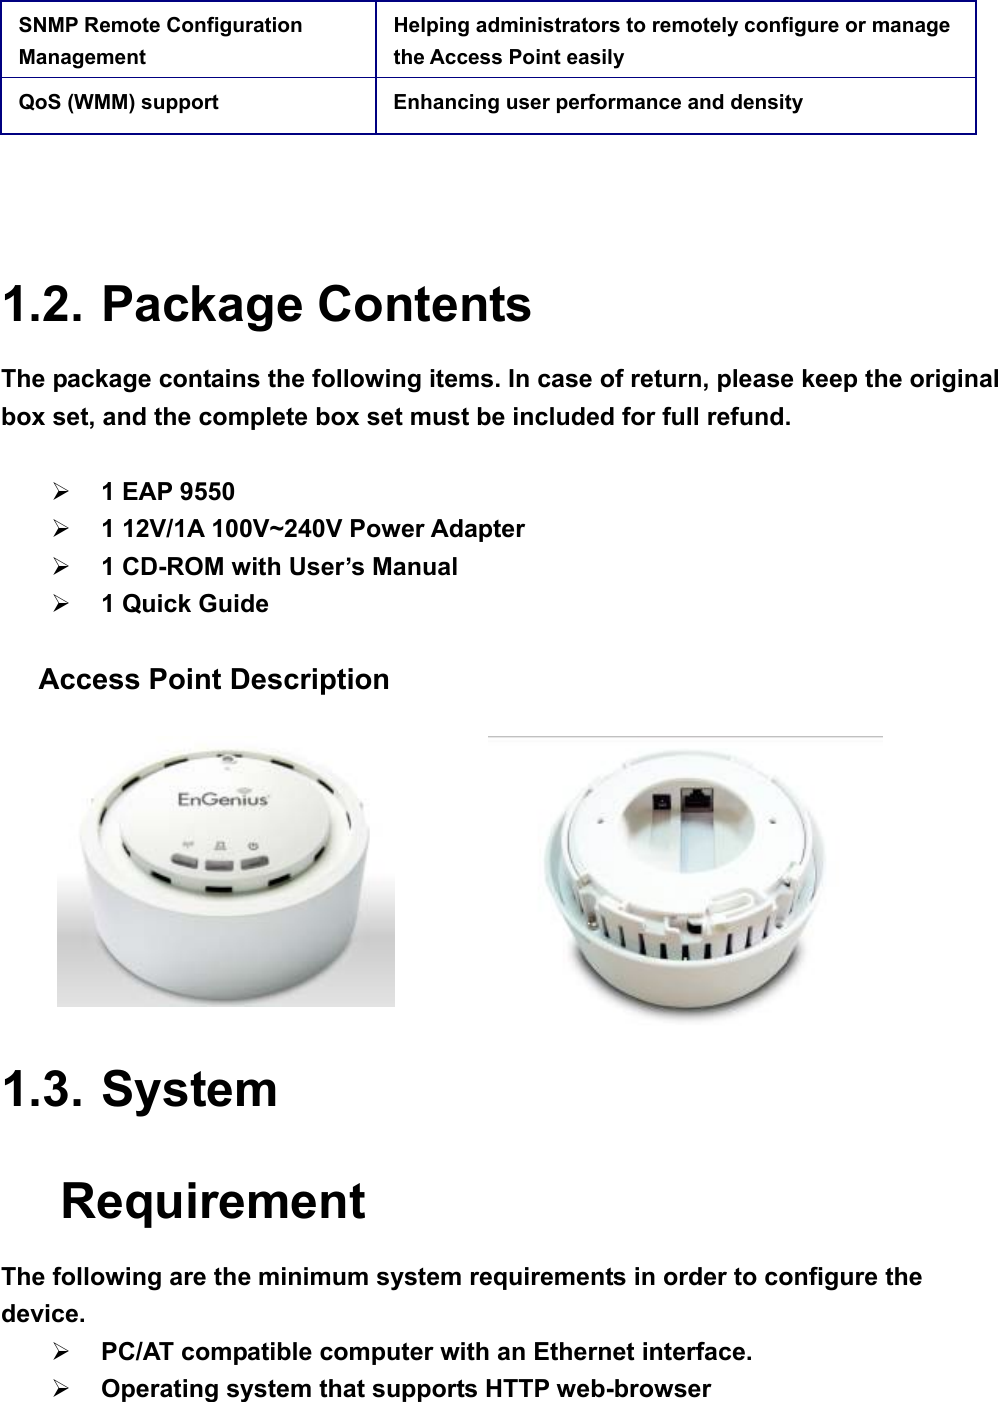 SNMP Remote Configuration Management Helping administrators to remotely configure or manage the Access Point easily QoS (WMM) support  Enhancing user performance and density  1.2. Package Contents The package contains the following items. In case of return, please keep the original box set, and the complete box set must be included for full refund.    ¾ 1 EAP 9550   ¾ 1 12V/1A 100V~240V Power Adapter ¾ 1 CD-ROM with User’s Manual   ¾ 1 Quick Guide   Access Point Description                                              1.3. System Requirement The following are the minimum system requirements in order to configure the device.  ¾ PC/AT compatible computer with an Ethernet interface. ¾ Operating system that supports HTTP web-browser  